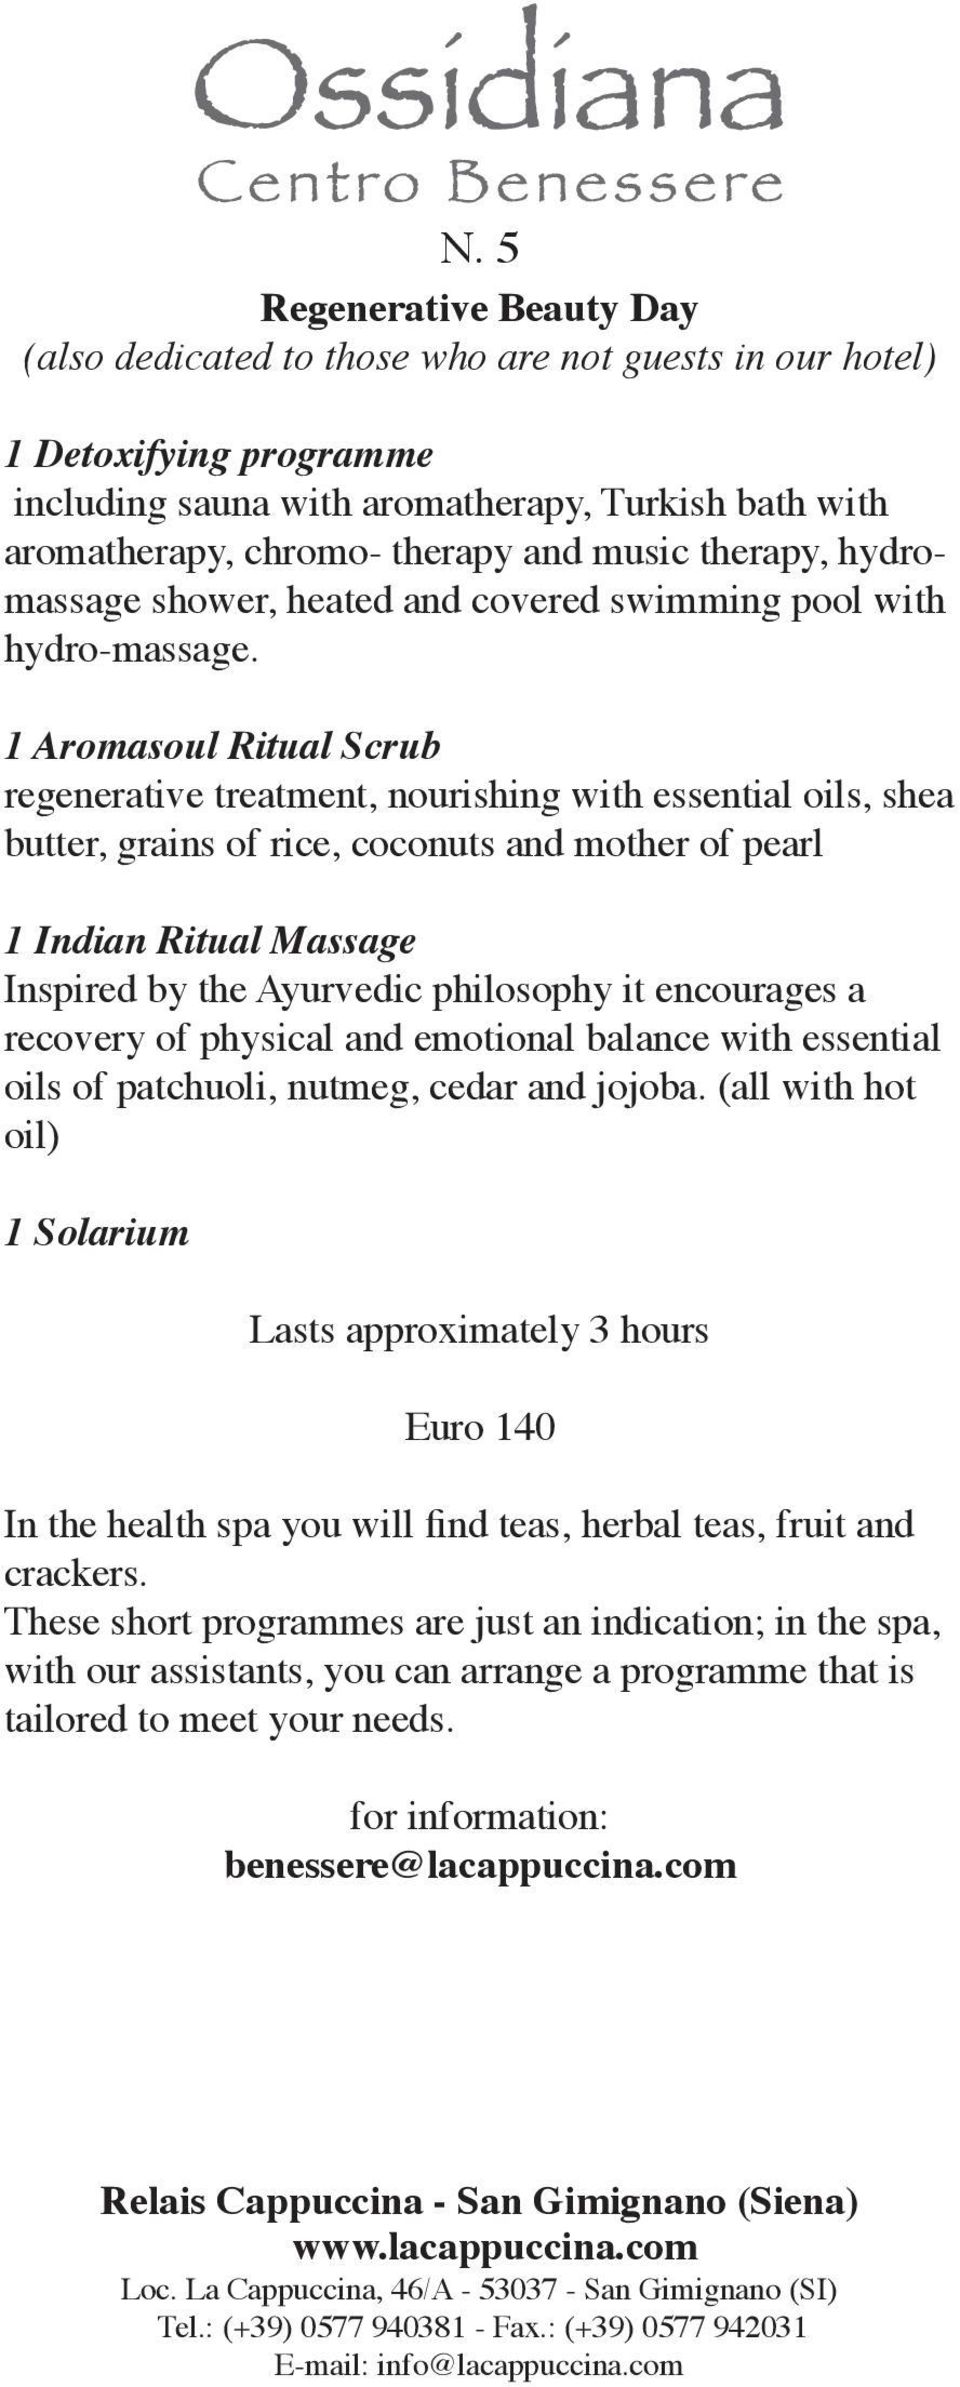 1 Aromasoul Ritual Scrub regenerative treatment, nourishing with essential oils, shea butter, grains of rice, coconuts and mother of pearl 1 Indian Ritual Massage Inspired by the Ayurvedic philosophy